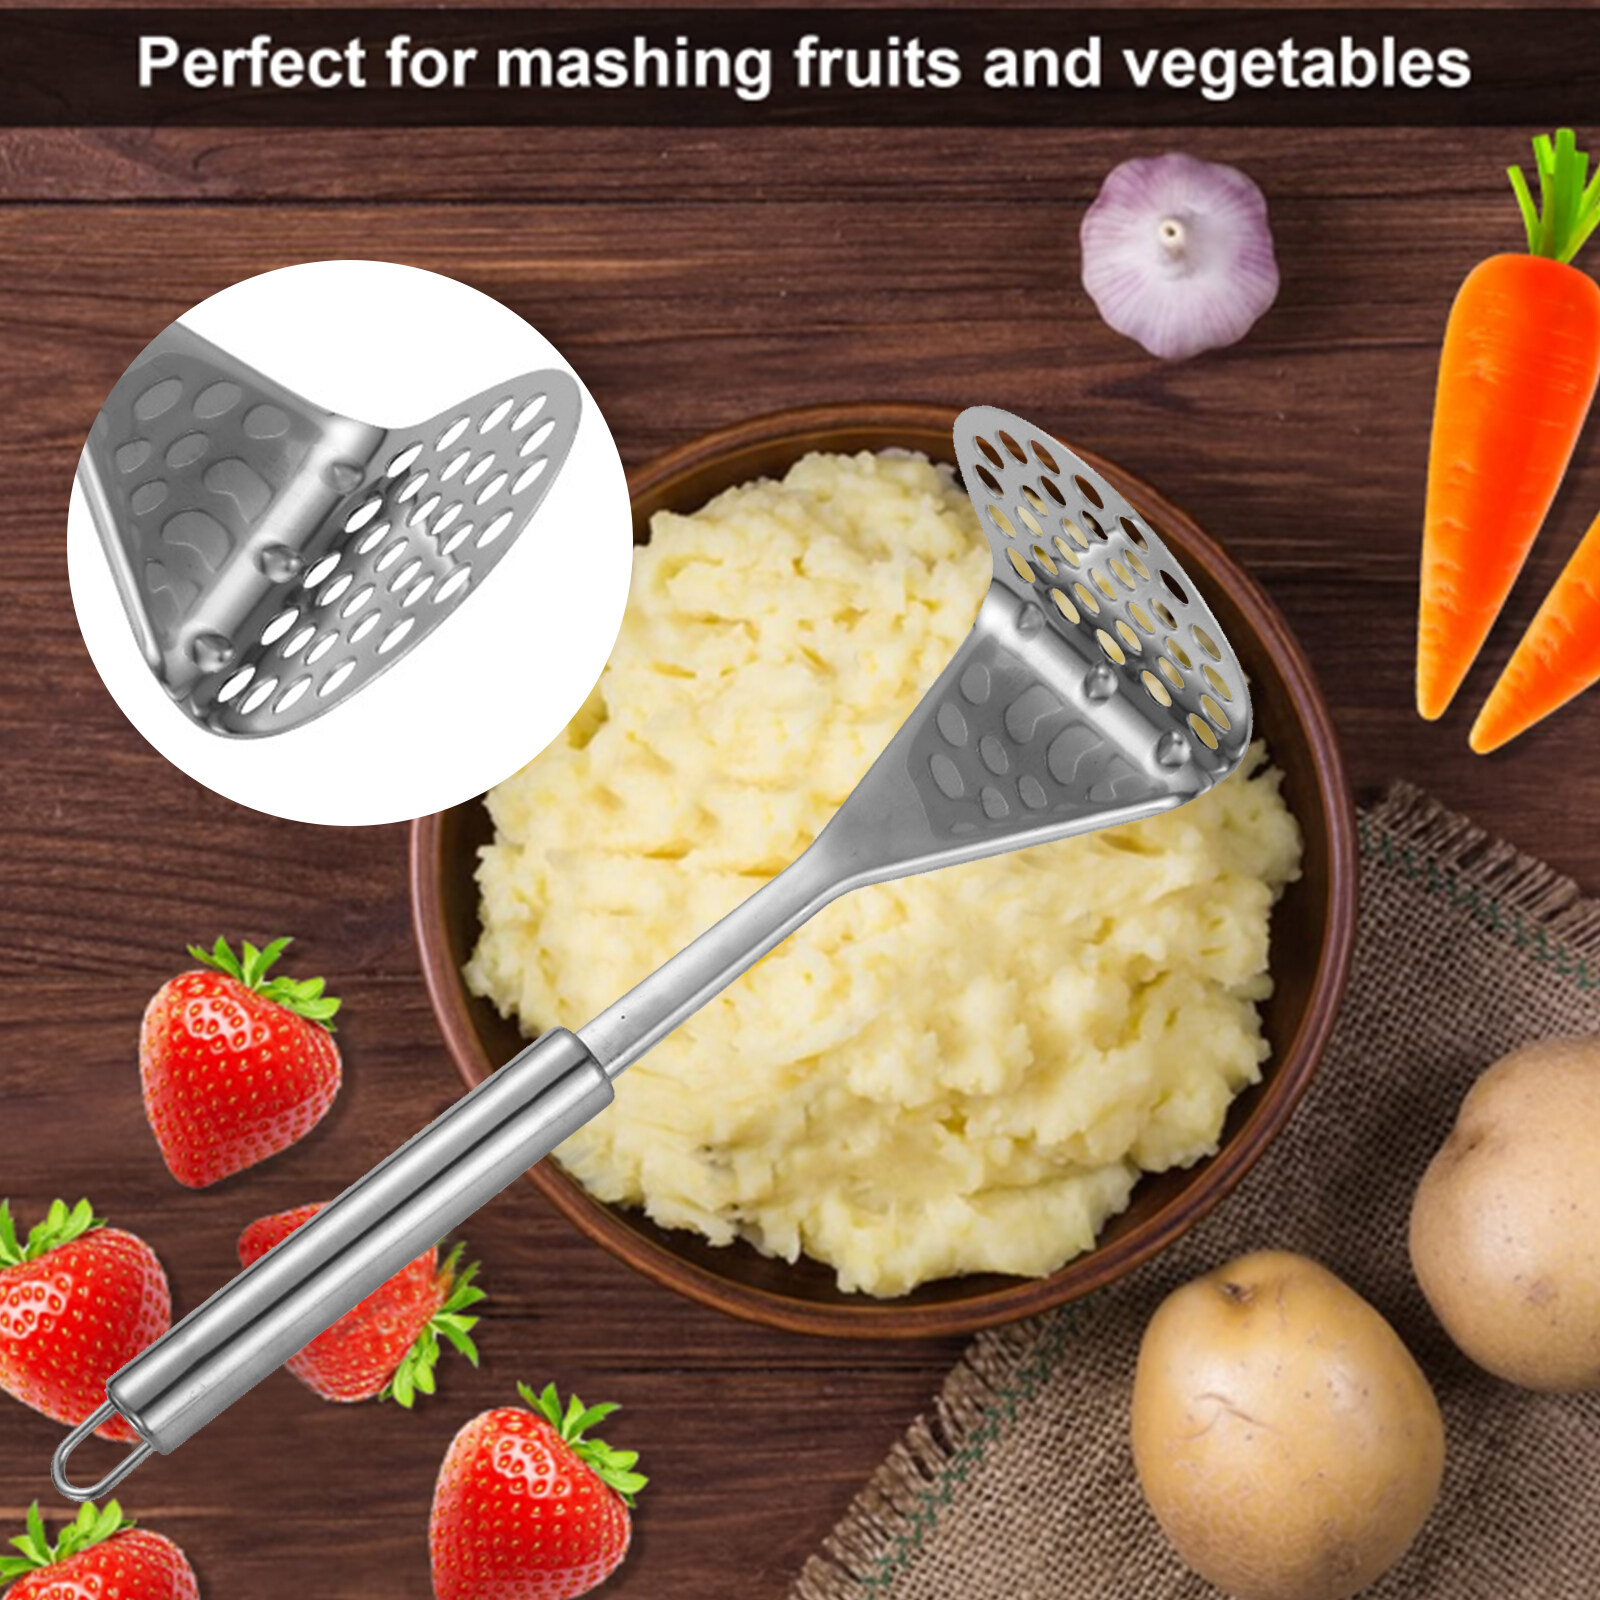 LifHap Potato Masher,Stainless Steel Mashed Potatoes Masher with Long Handle for Beans,Avocado,Fruit,Vegetables.One Piece Construction Heavy Duty